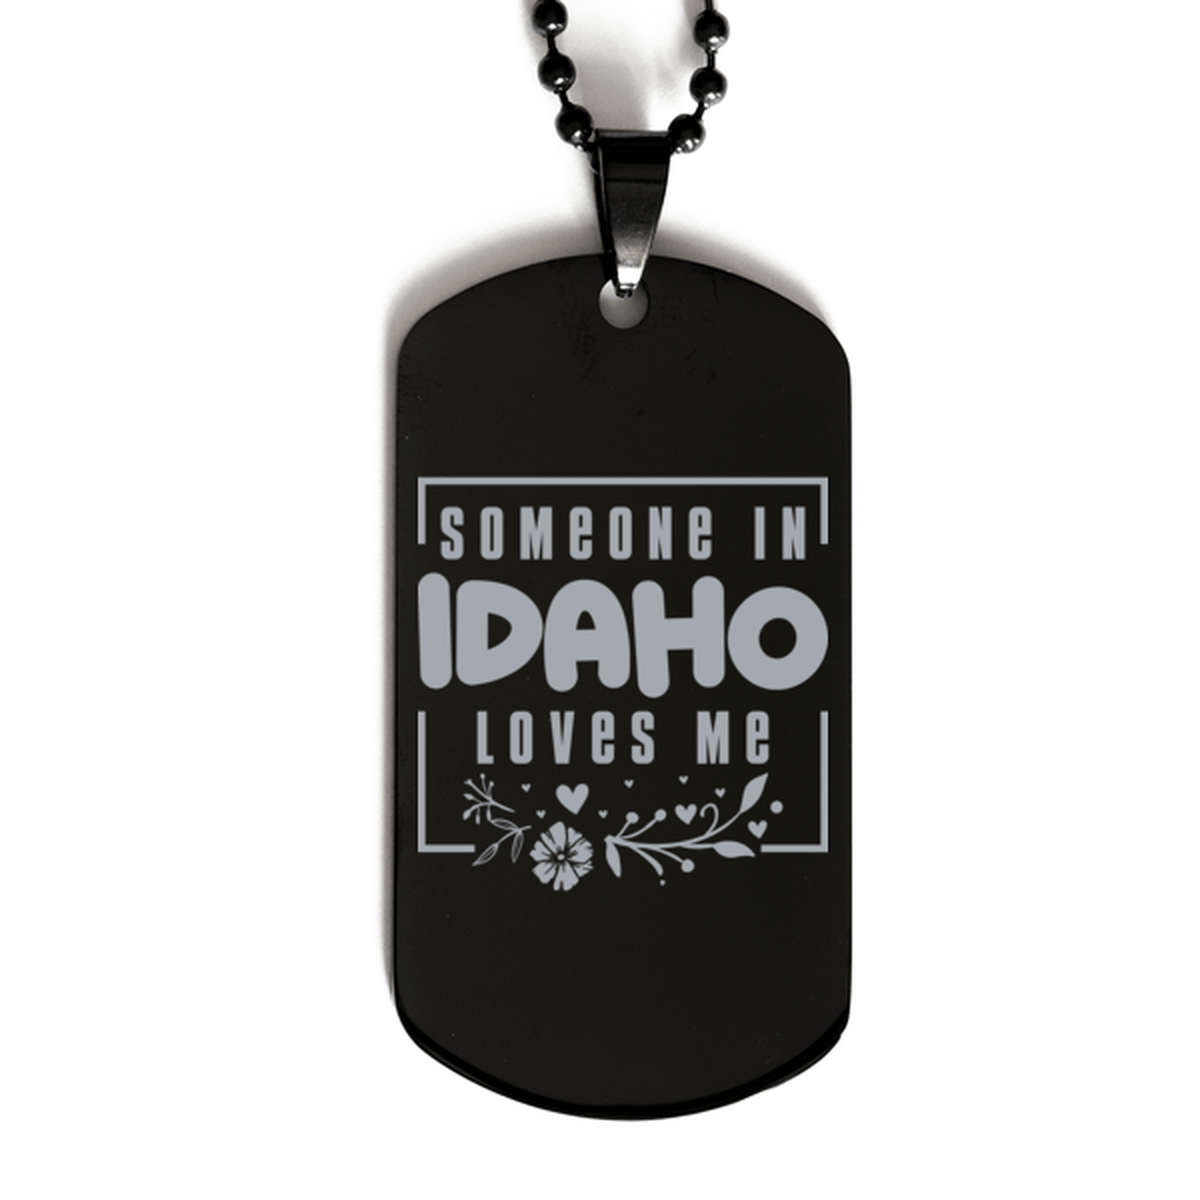 Cute Idaho Black Dog Tag Necklace, Someone in Idaho Loves Me, Best Birthday Gifts from Idaho Friends & Family